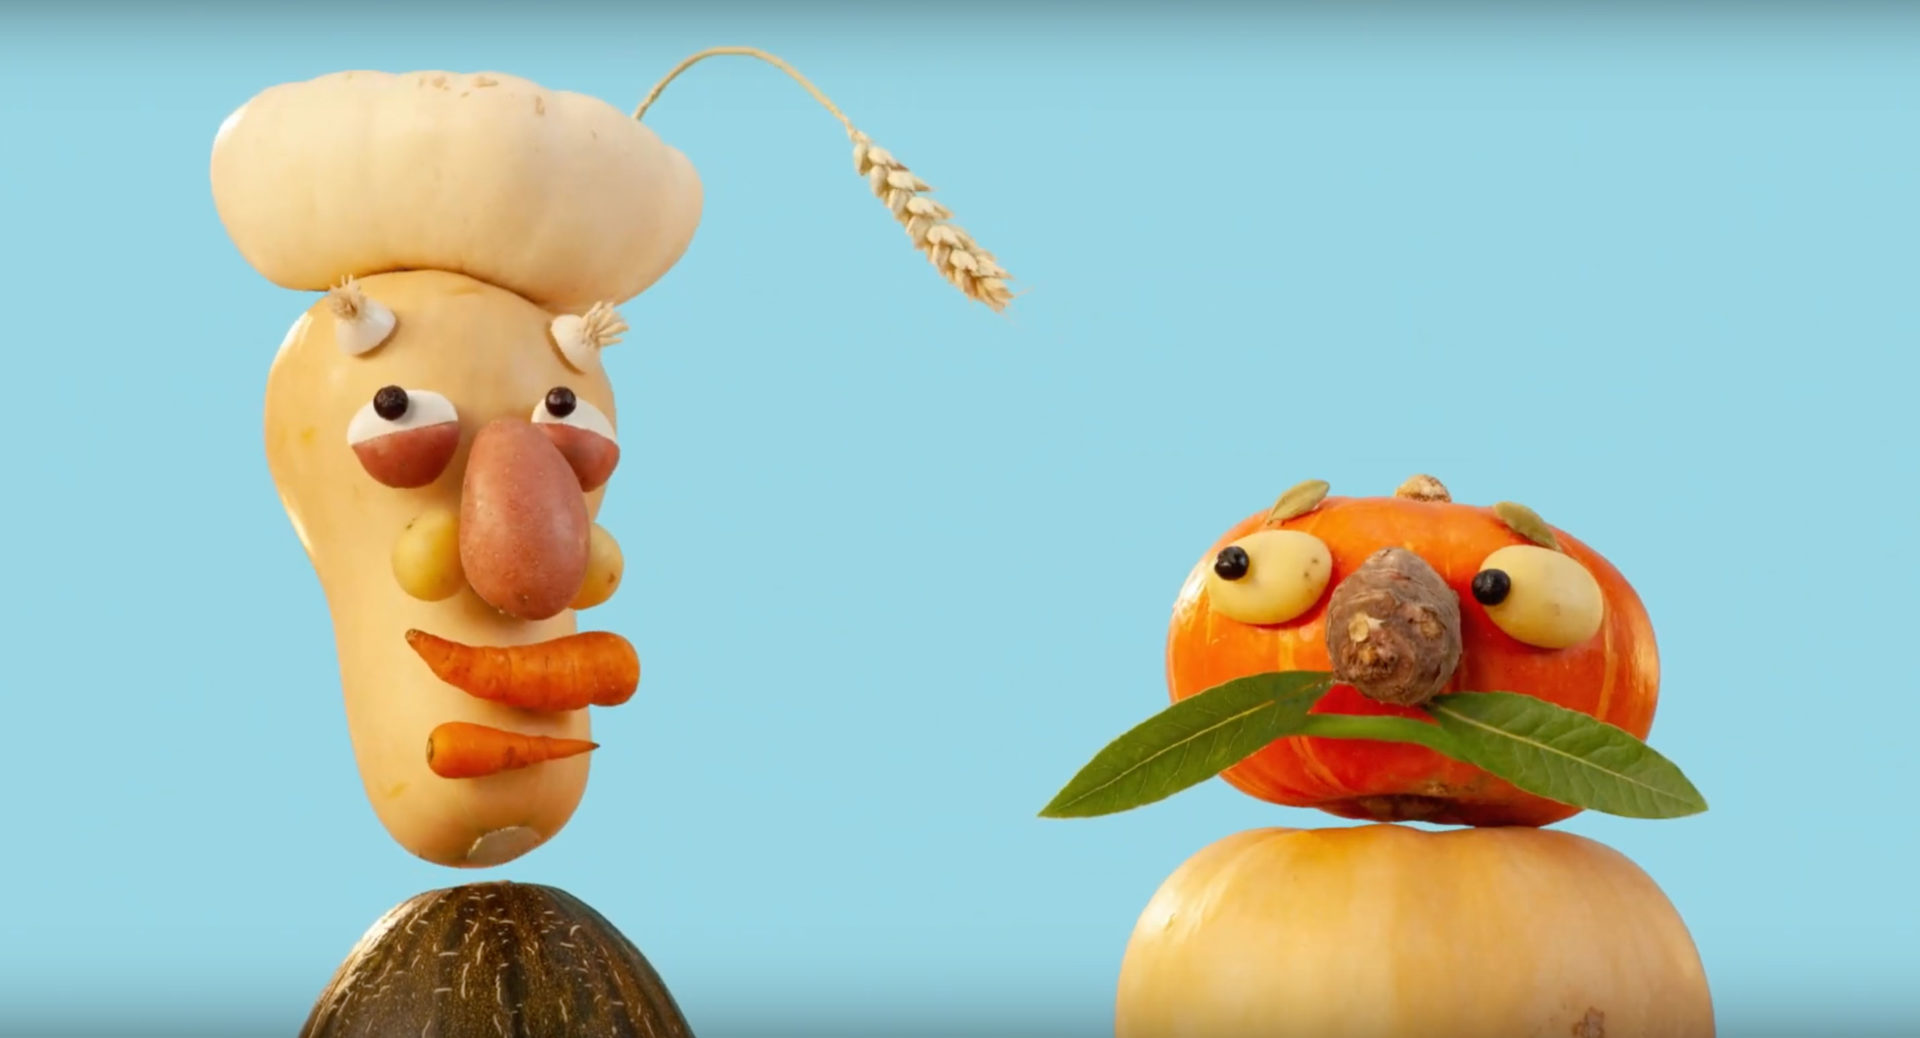 Vegetables Shaped Like Two Heads In A Commercial For Rabobank